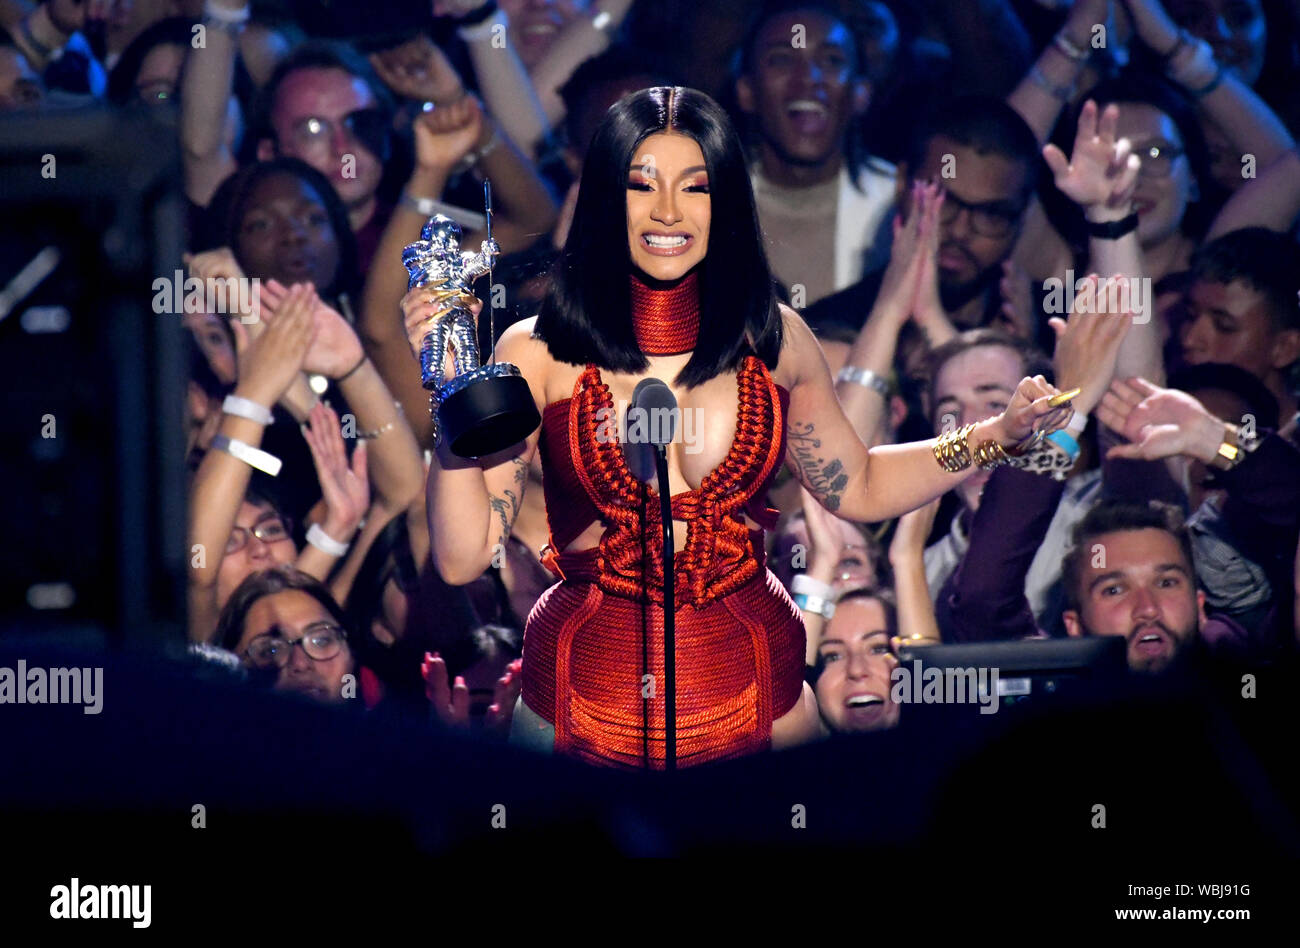 Cardi B collects her award for Best Hip Hop Video on stage at the MTV Video Music Awards 2019 held at the Prudential Center in Newark, New Jersey. Stock Photo